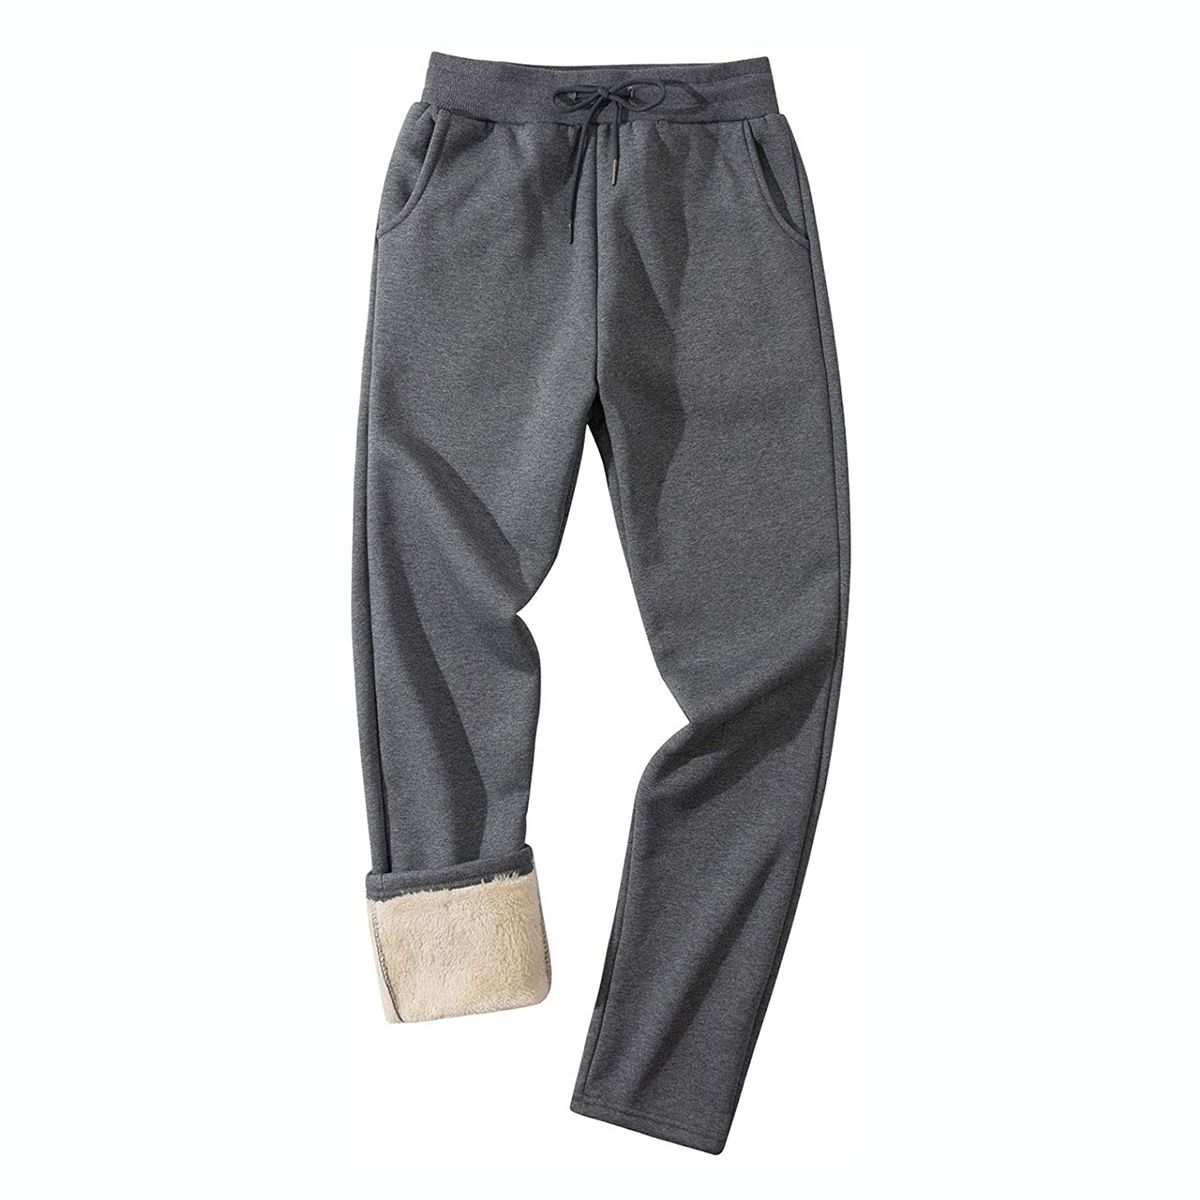 5 Under-$40 Fleece-lined Sweatpants You Can Shop on Amazon | Travel ...